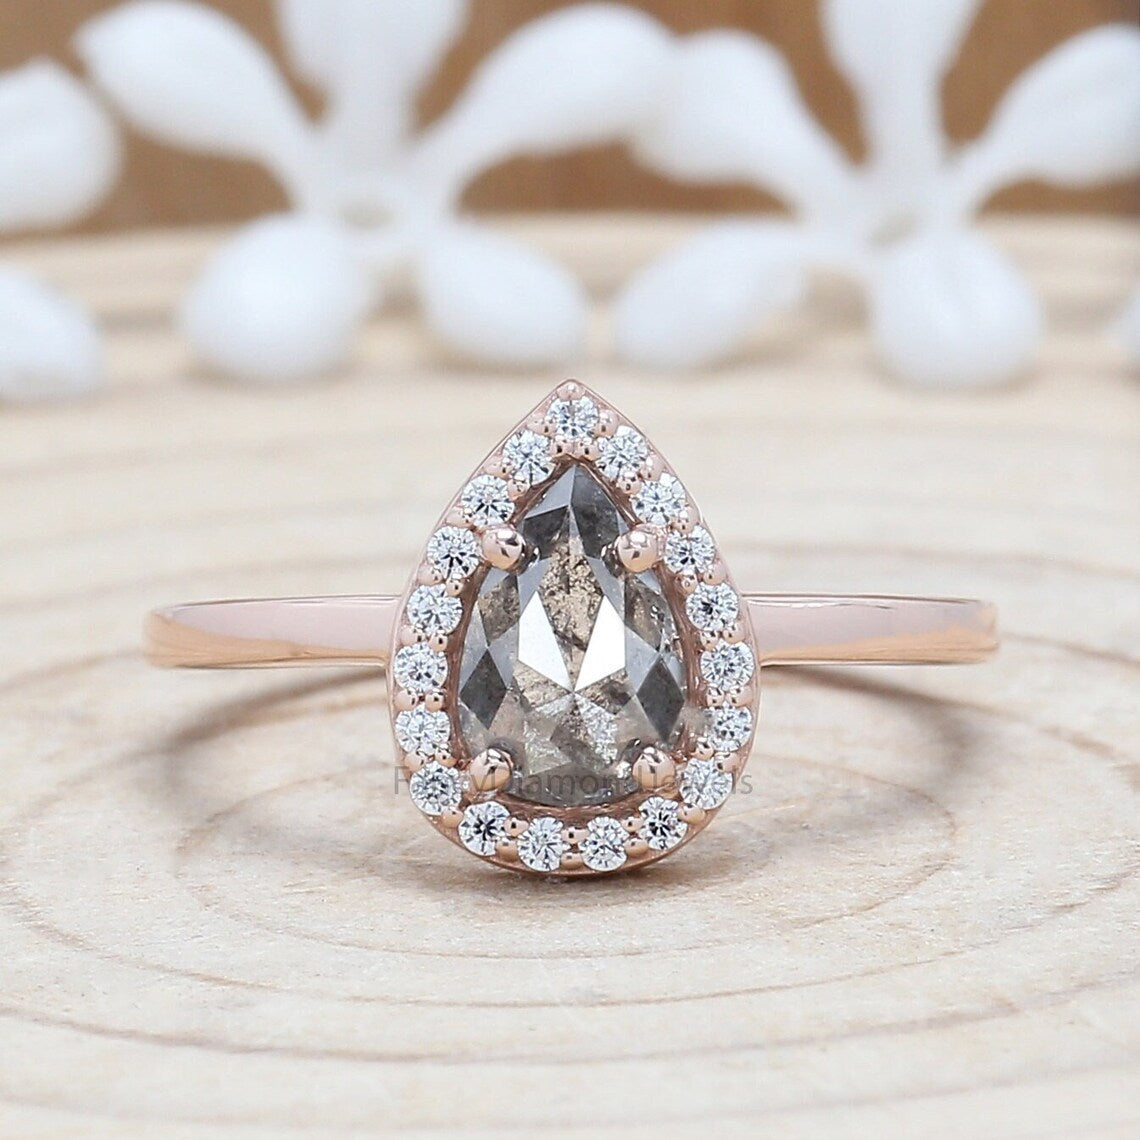 Pear Cut Salt And Pepper Diamond Ring 1.03 Ct 7.70 MM Pear Diamond Ring 14K Solid Rose Gold Silver Pear Engagement Ring Gift For Her QL9950